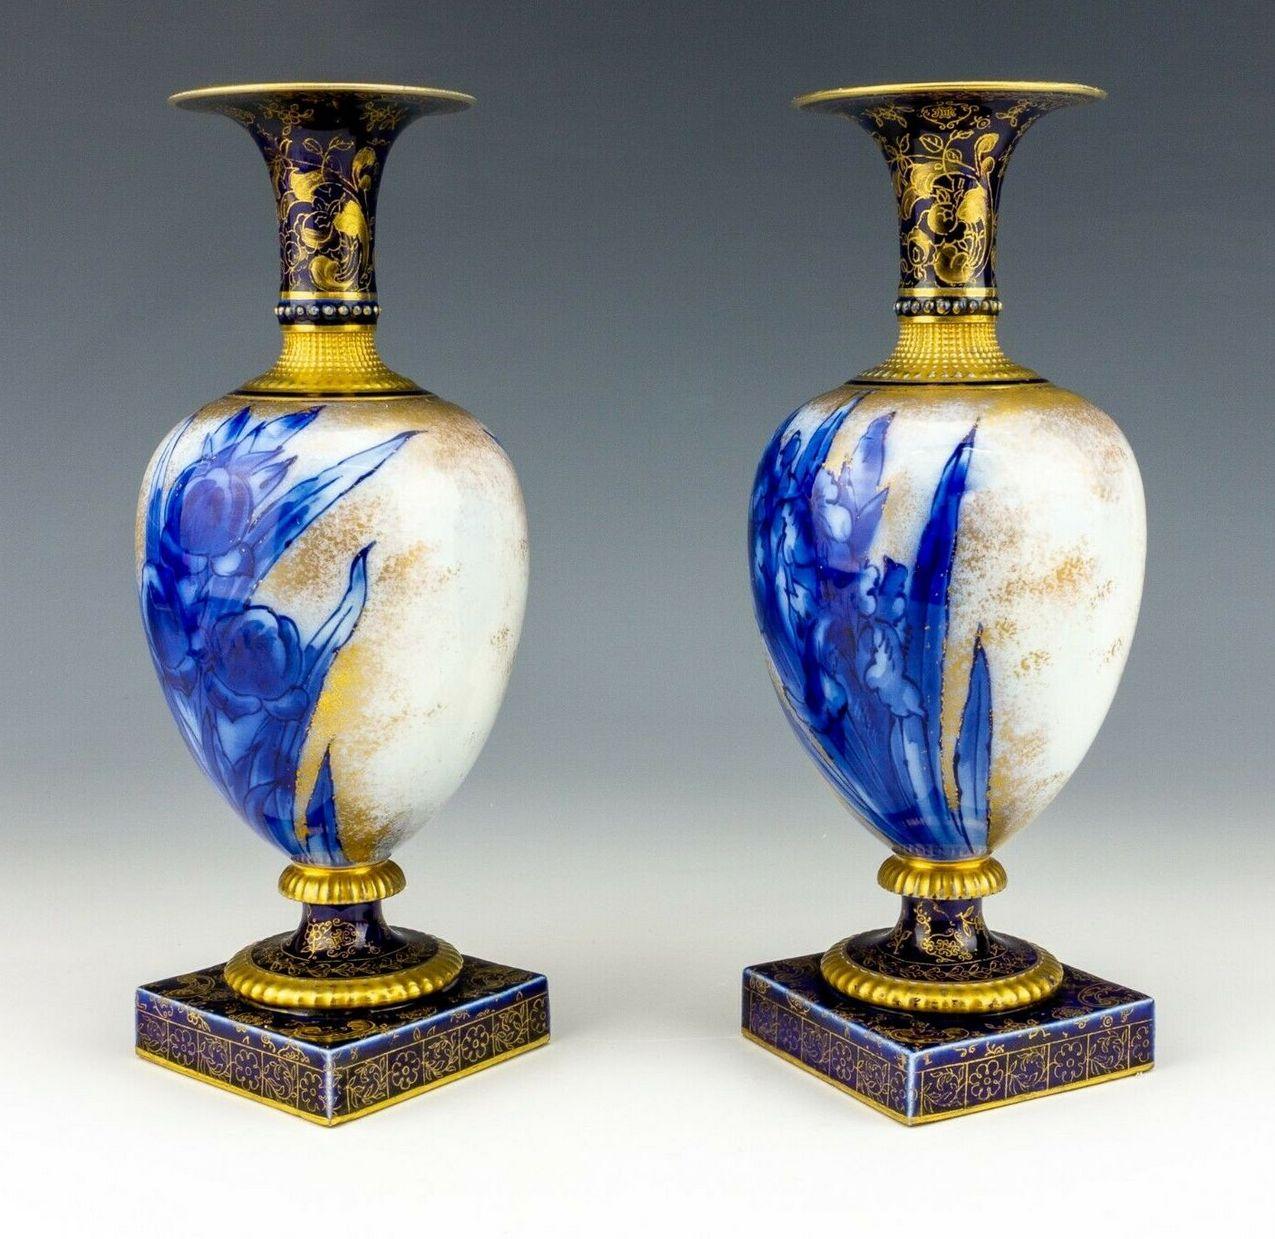 Stylish identical pair of English porcelain mantle vases by Famous English pottery maker Royal Doulton Burslem, late 19th century.

Each ovoid central body superbly decorated with flo-blue Iris flowers on an off-white ground, the back with similar